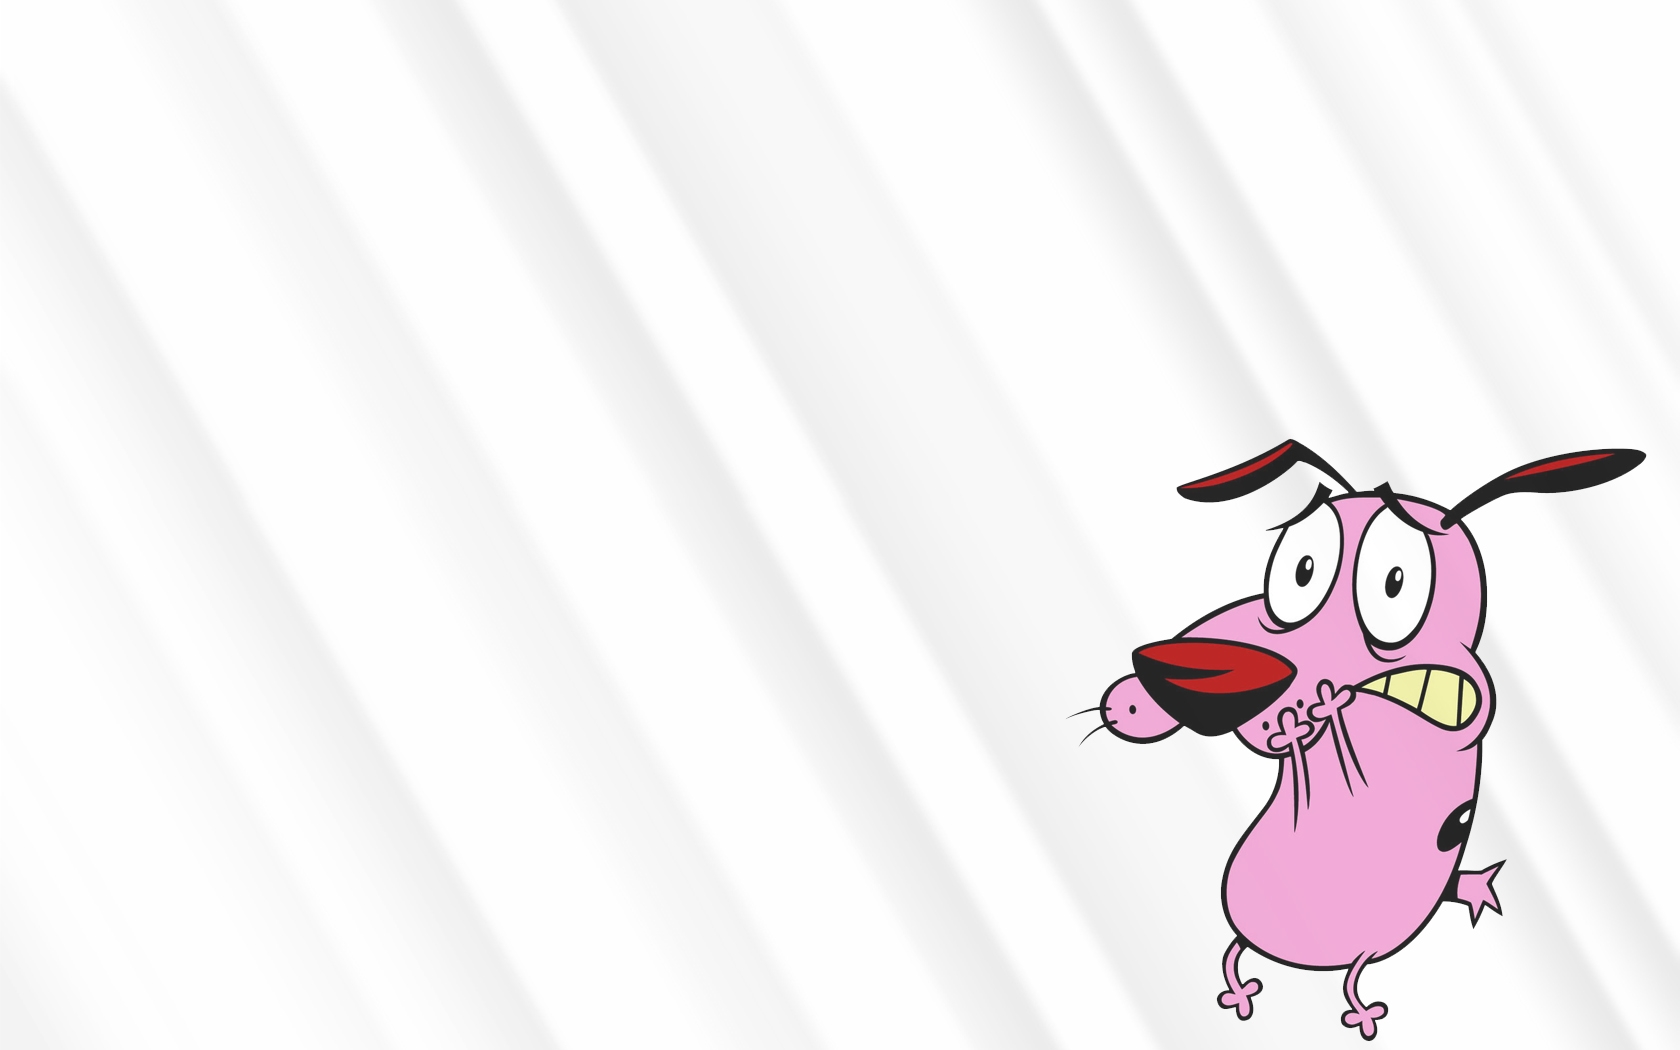 courage the cowardly dog 1680x1050 wallpaper High Quality Wallpaper, High Definition Wallpaper